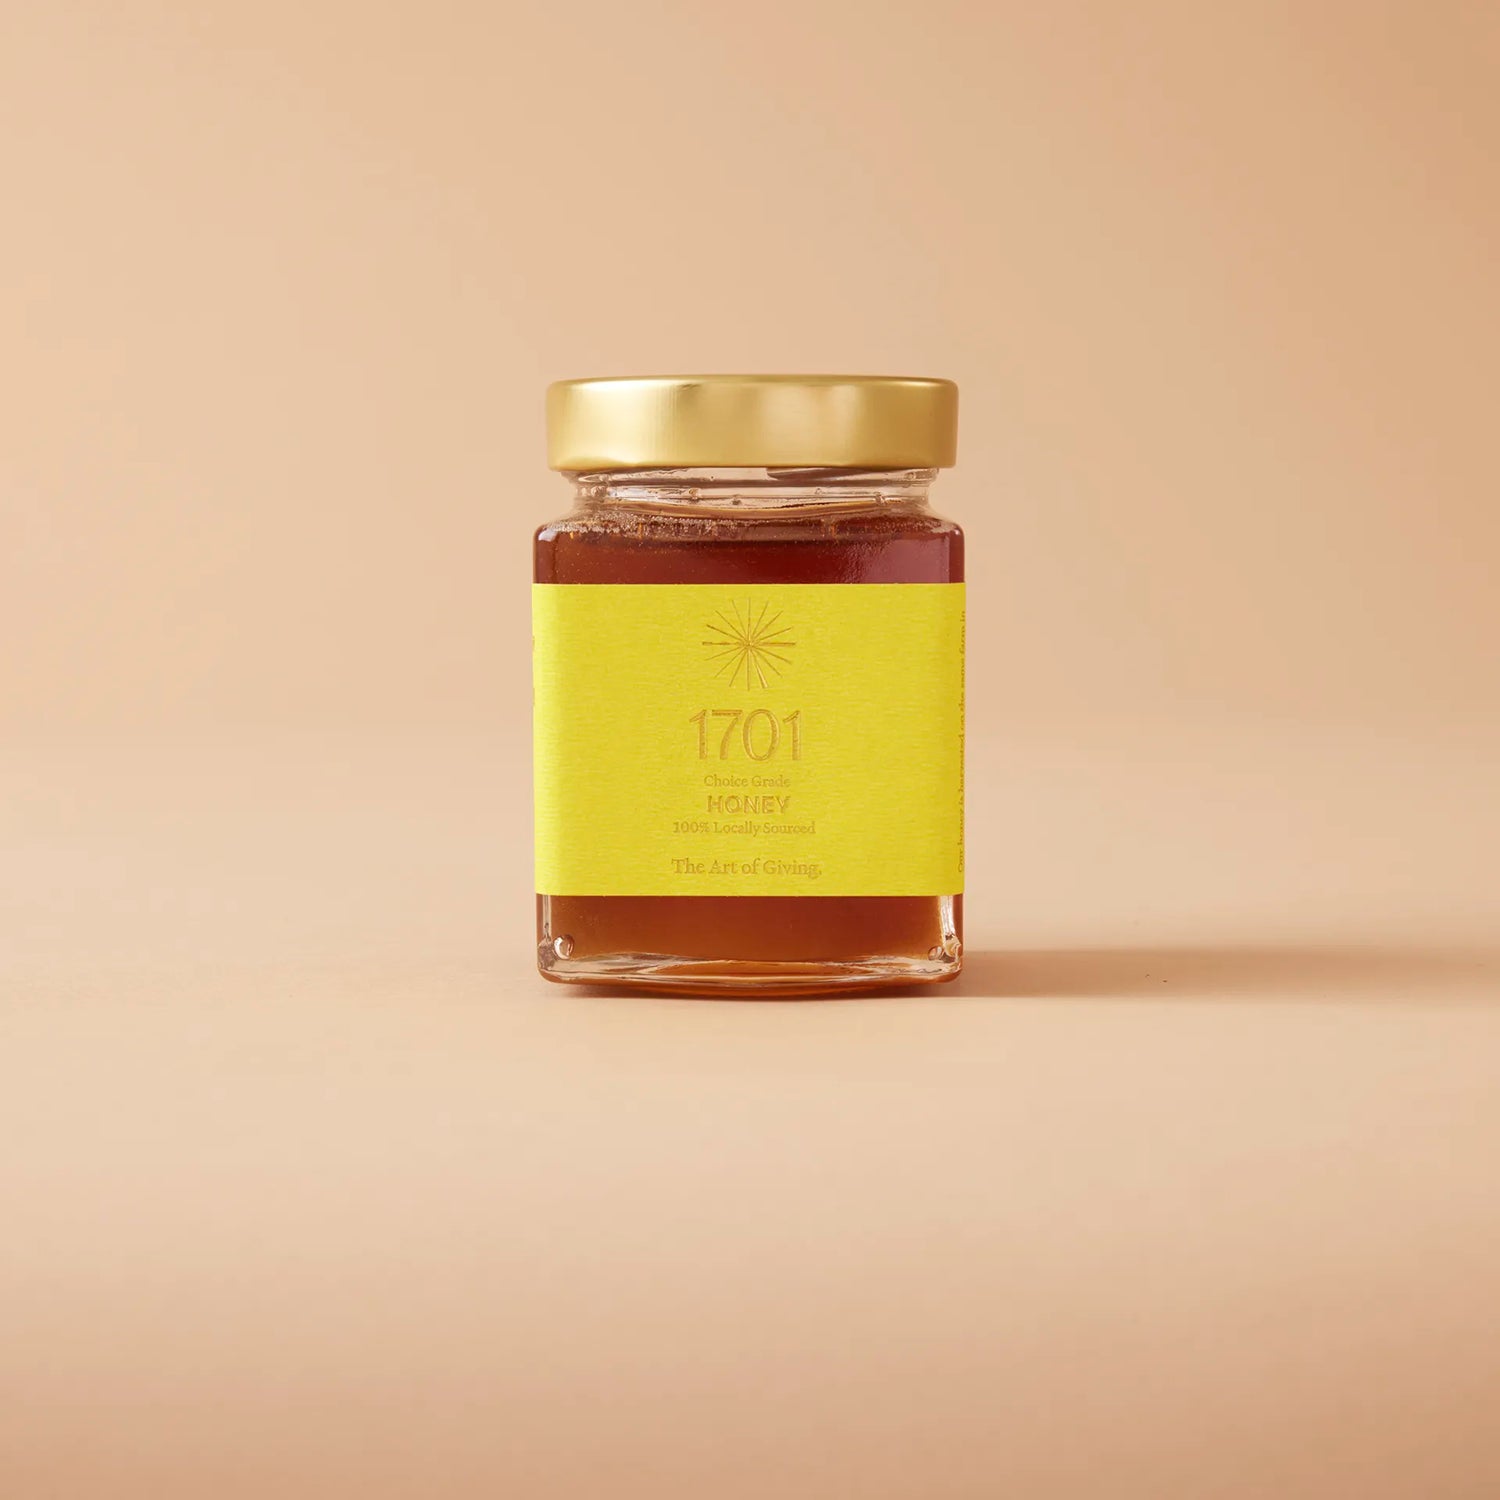 Our Pure Raw Locally Soured Honey